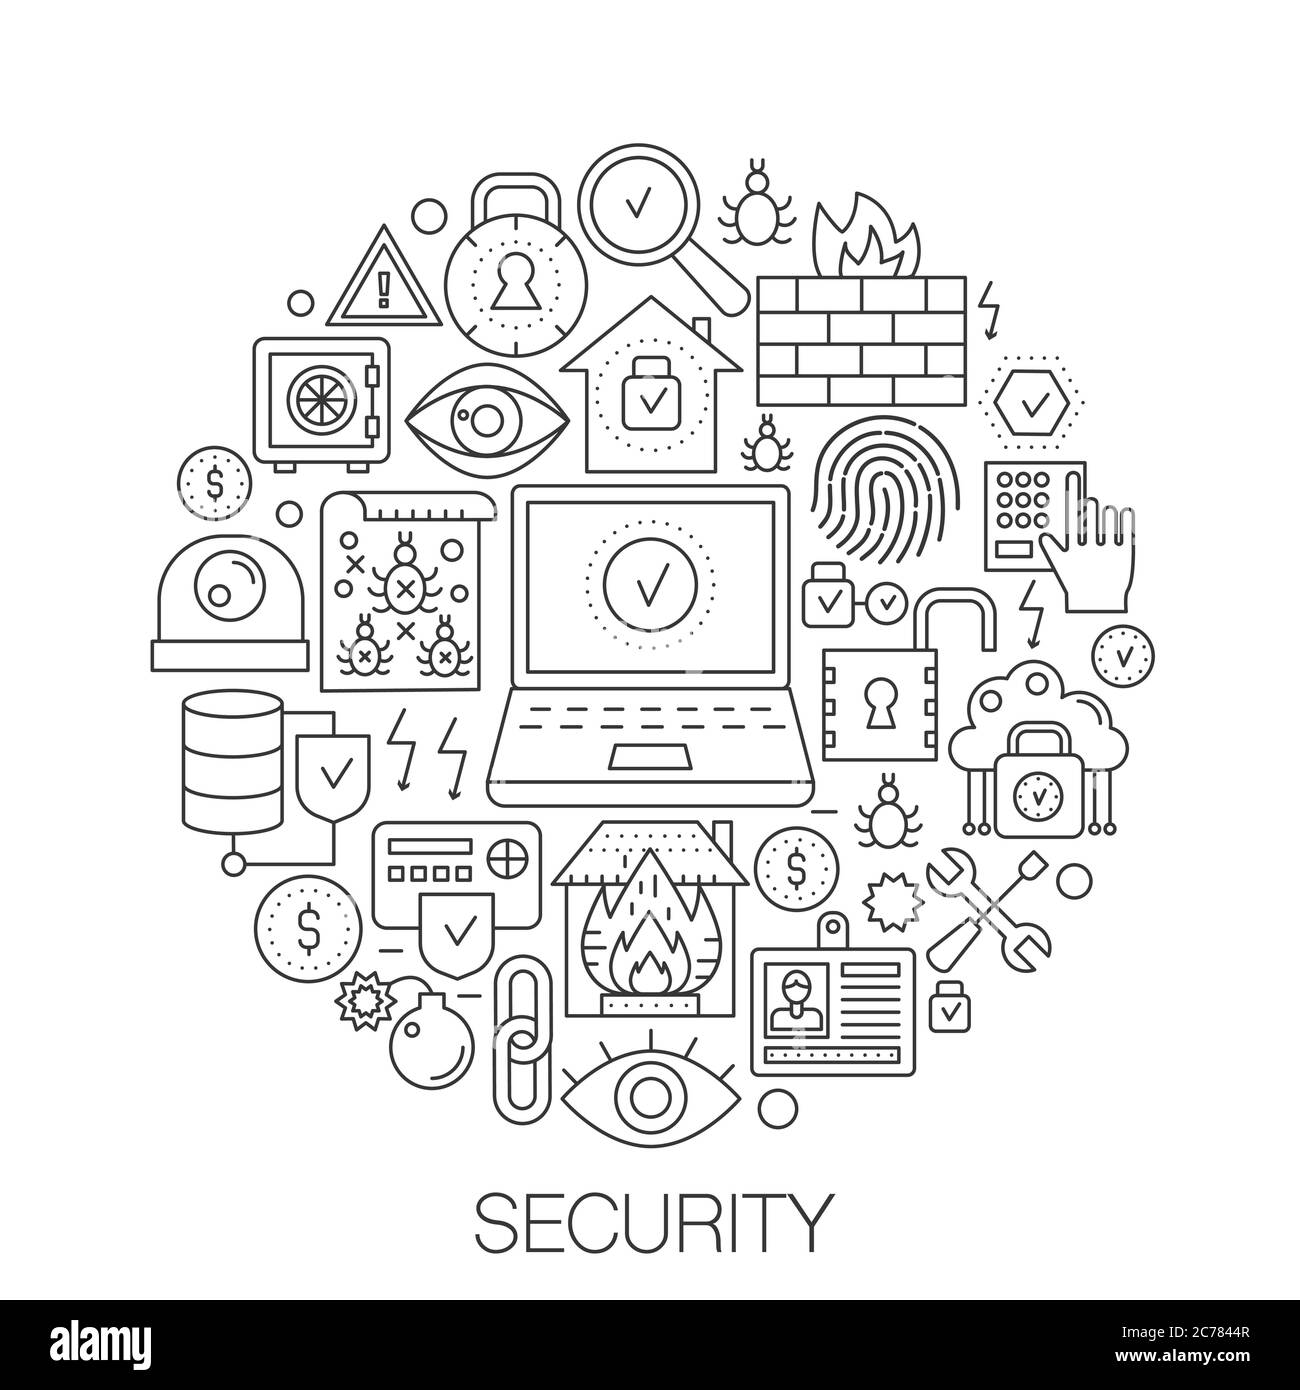 Security in circle - concept line illustration for cover, emblem, badge. Security thin line stroke icons. Stock Vector